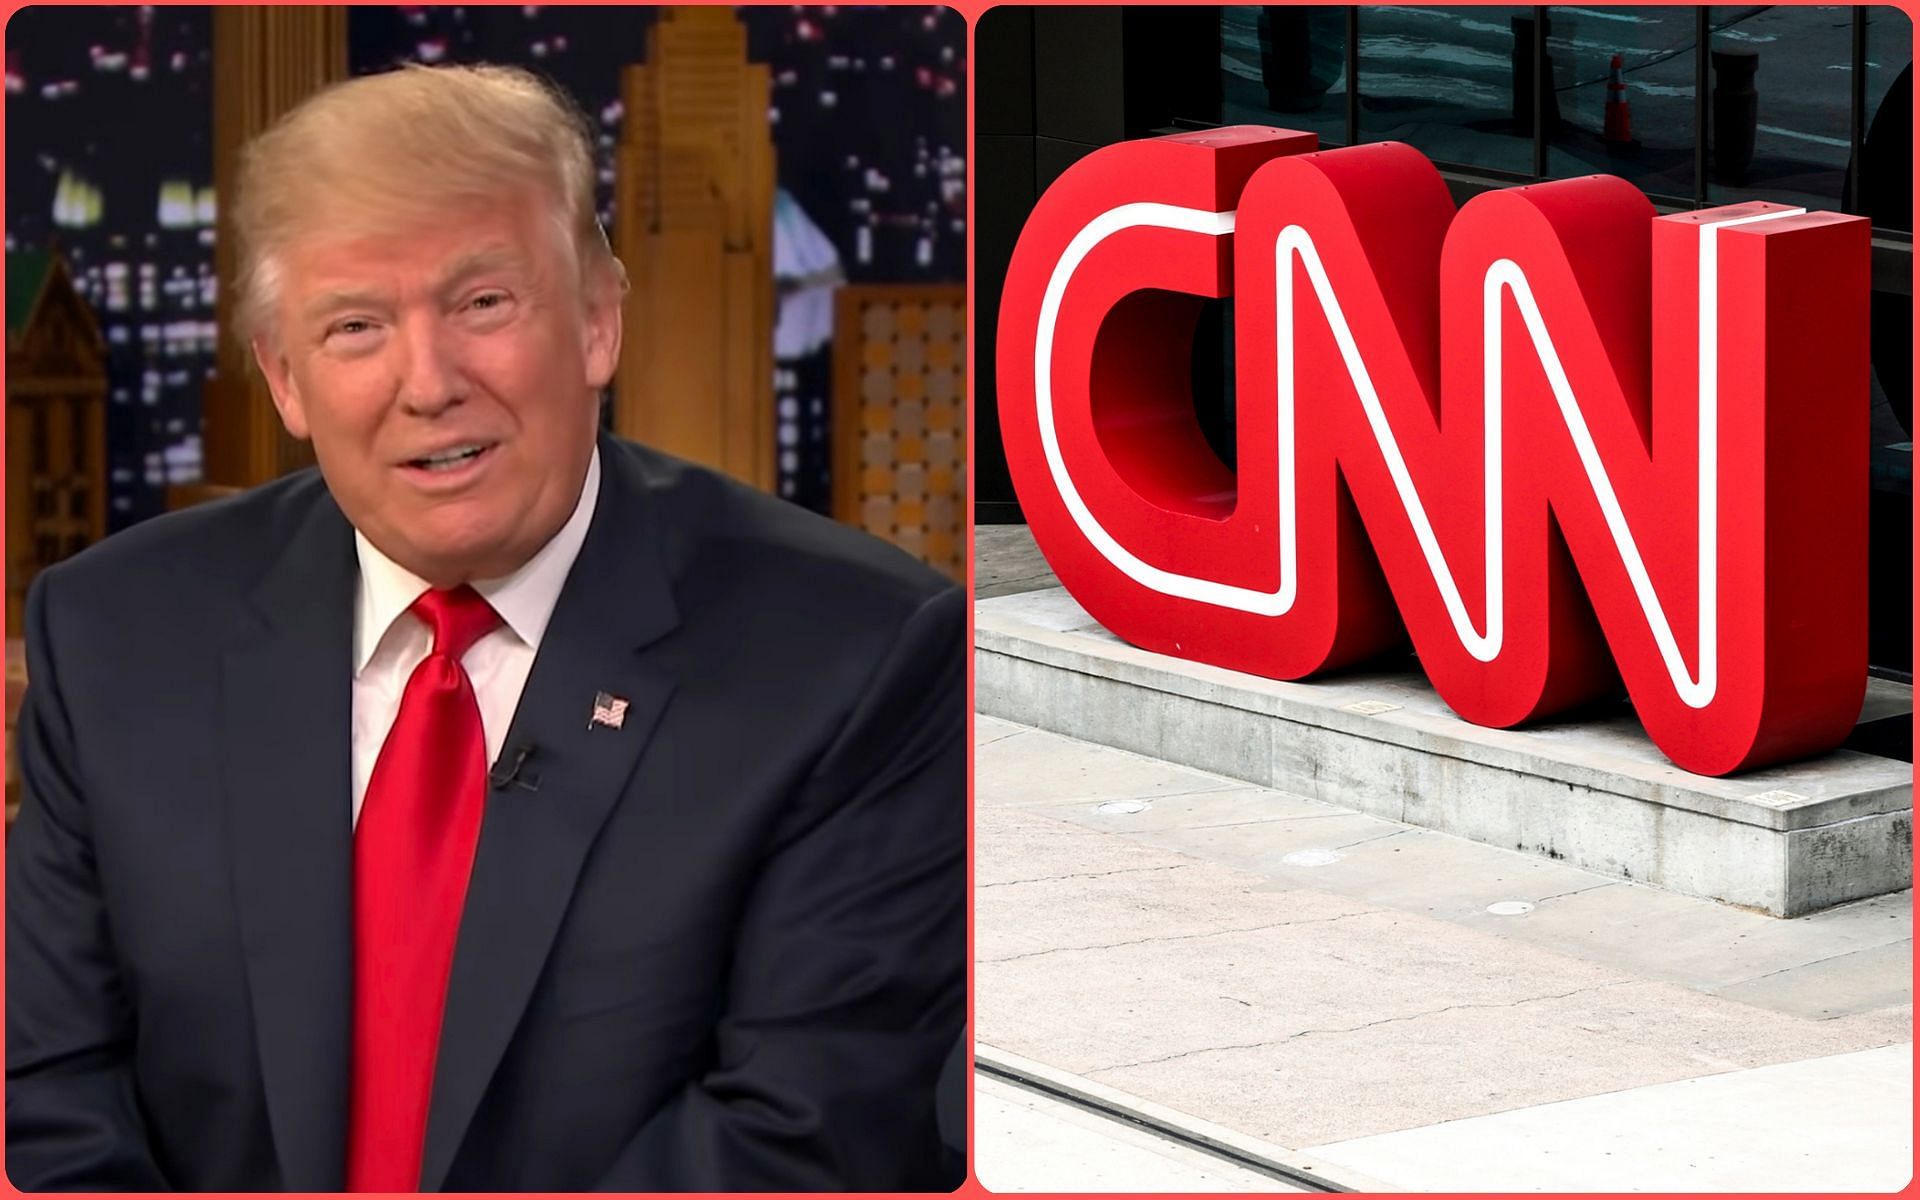 Donald Trump sues CNN with a $475 million defamation lawsuit (Images via YouTube/The Tonight Show Starring Jimmy Fallon and Anna Moneymaker/Getty Images)